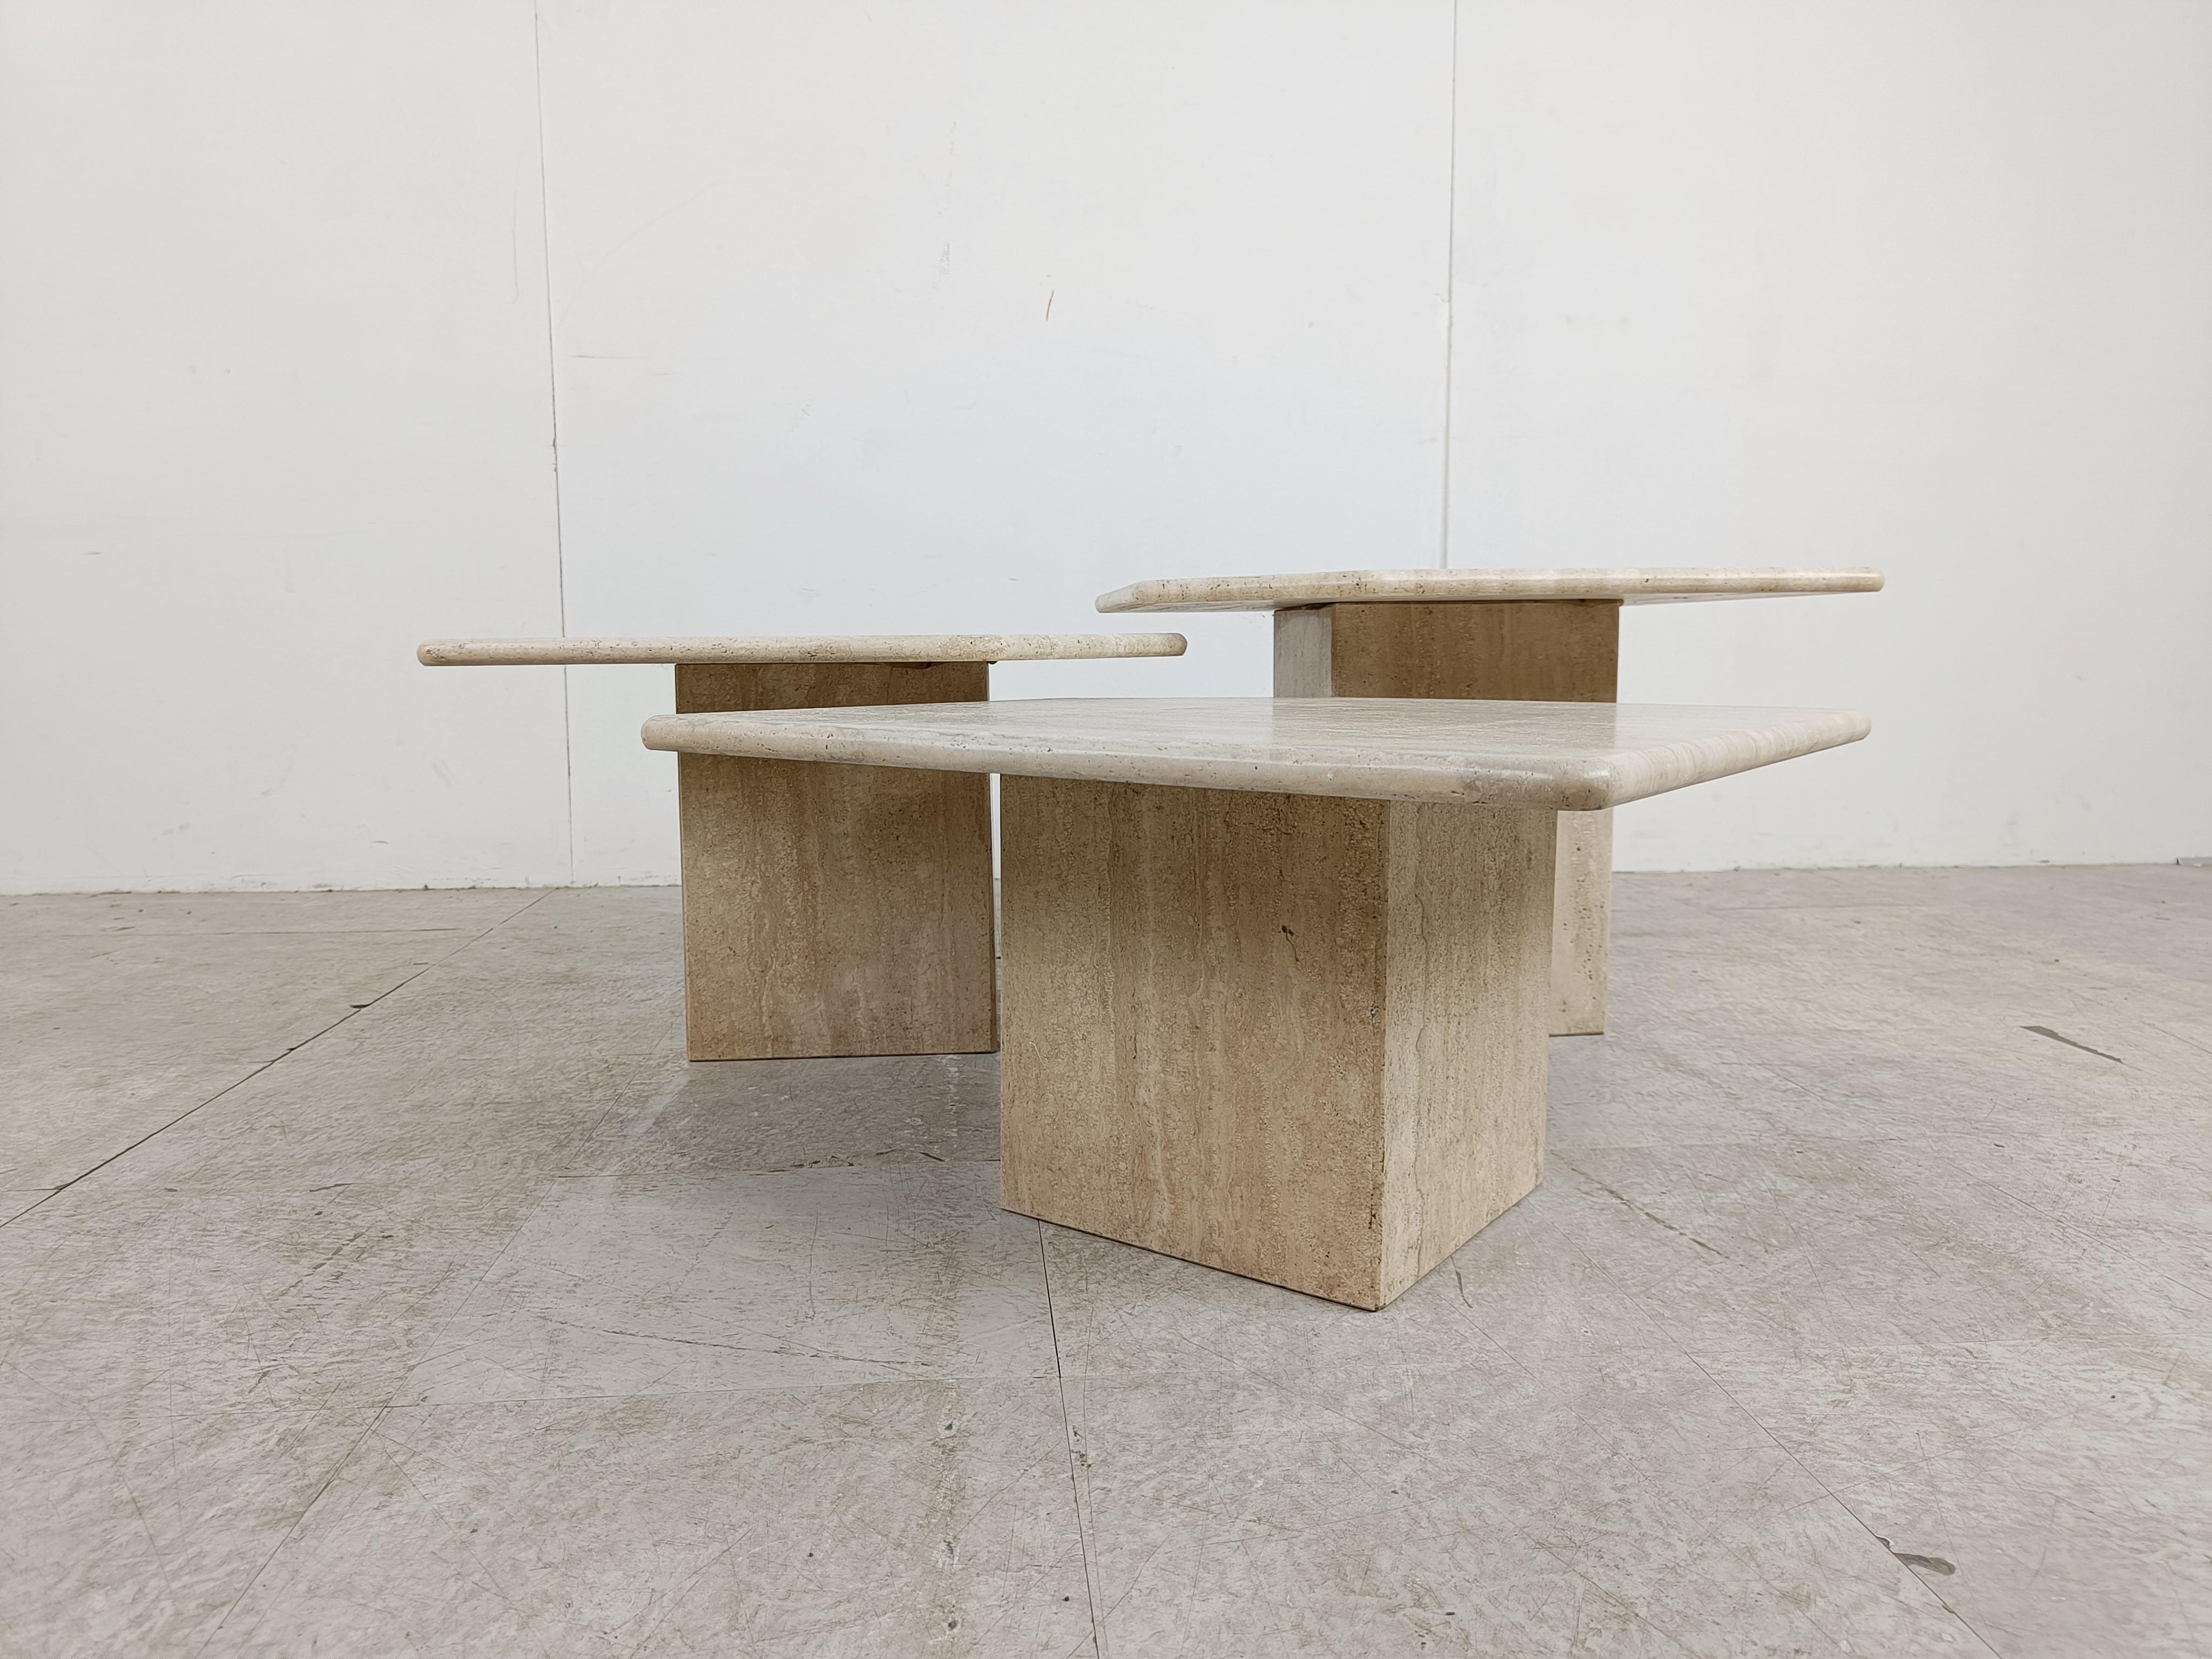 Set of 1970s italian travertine stone nesting tables or side tables.

The tables can be set up in different compositions. Timeless items.

Beautiful colour.

Very good condition

1970s - italy

Dimensions:
Largest table: 60*60*40 cm 

Ref.: